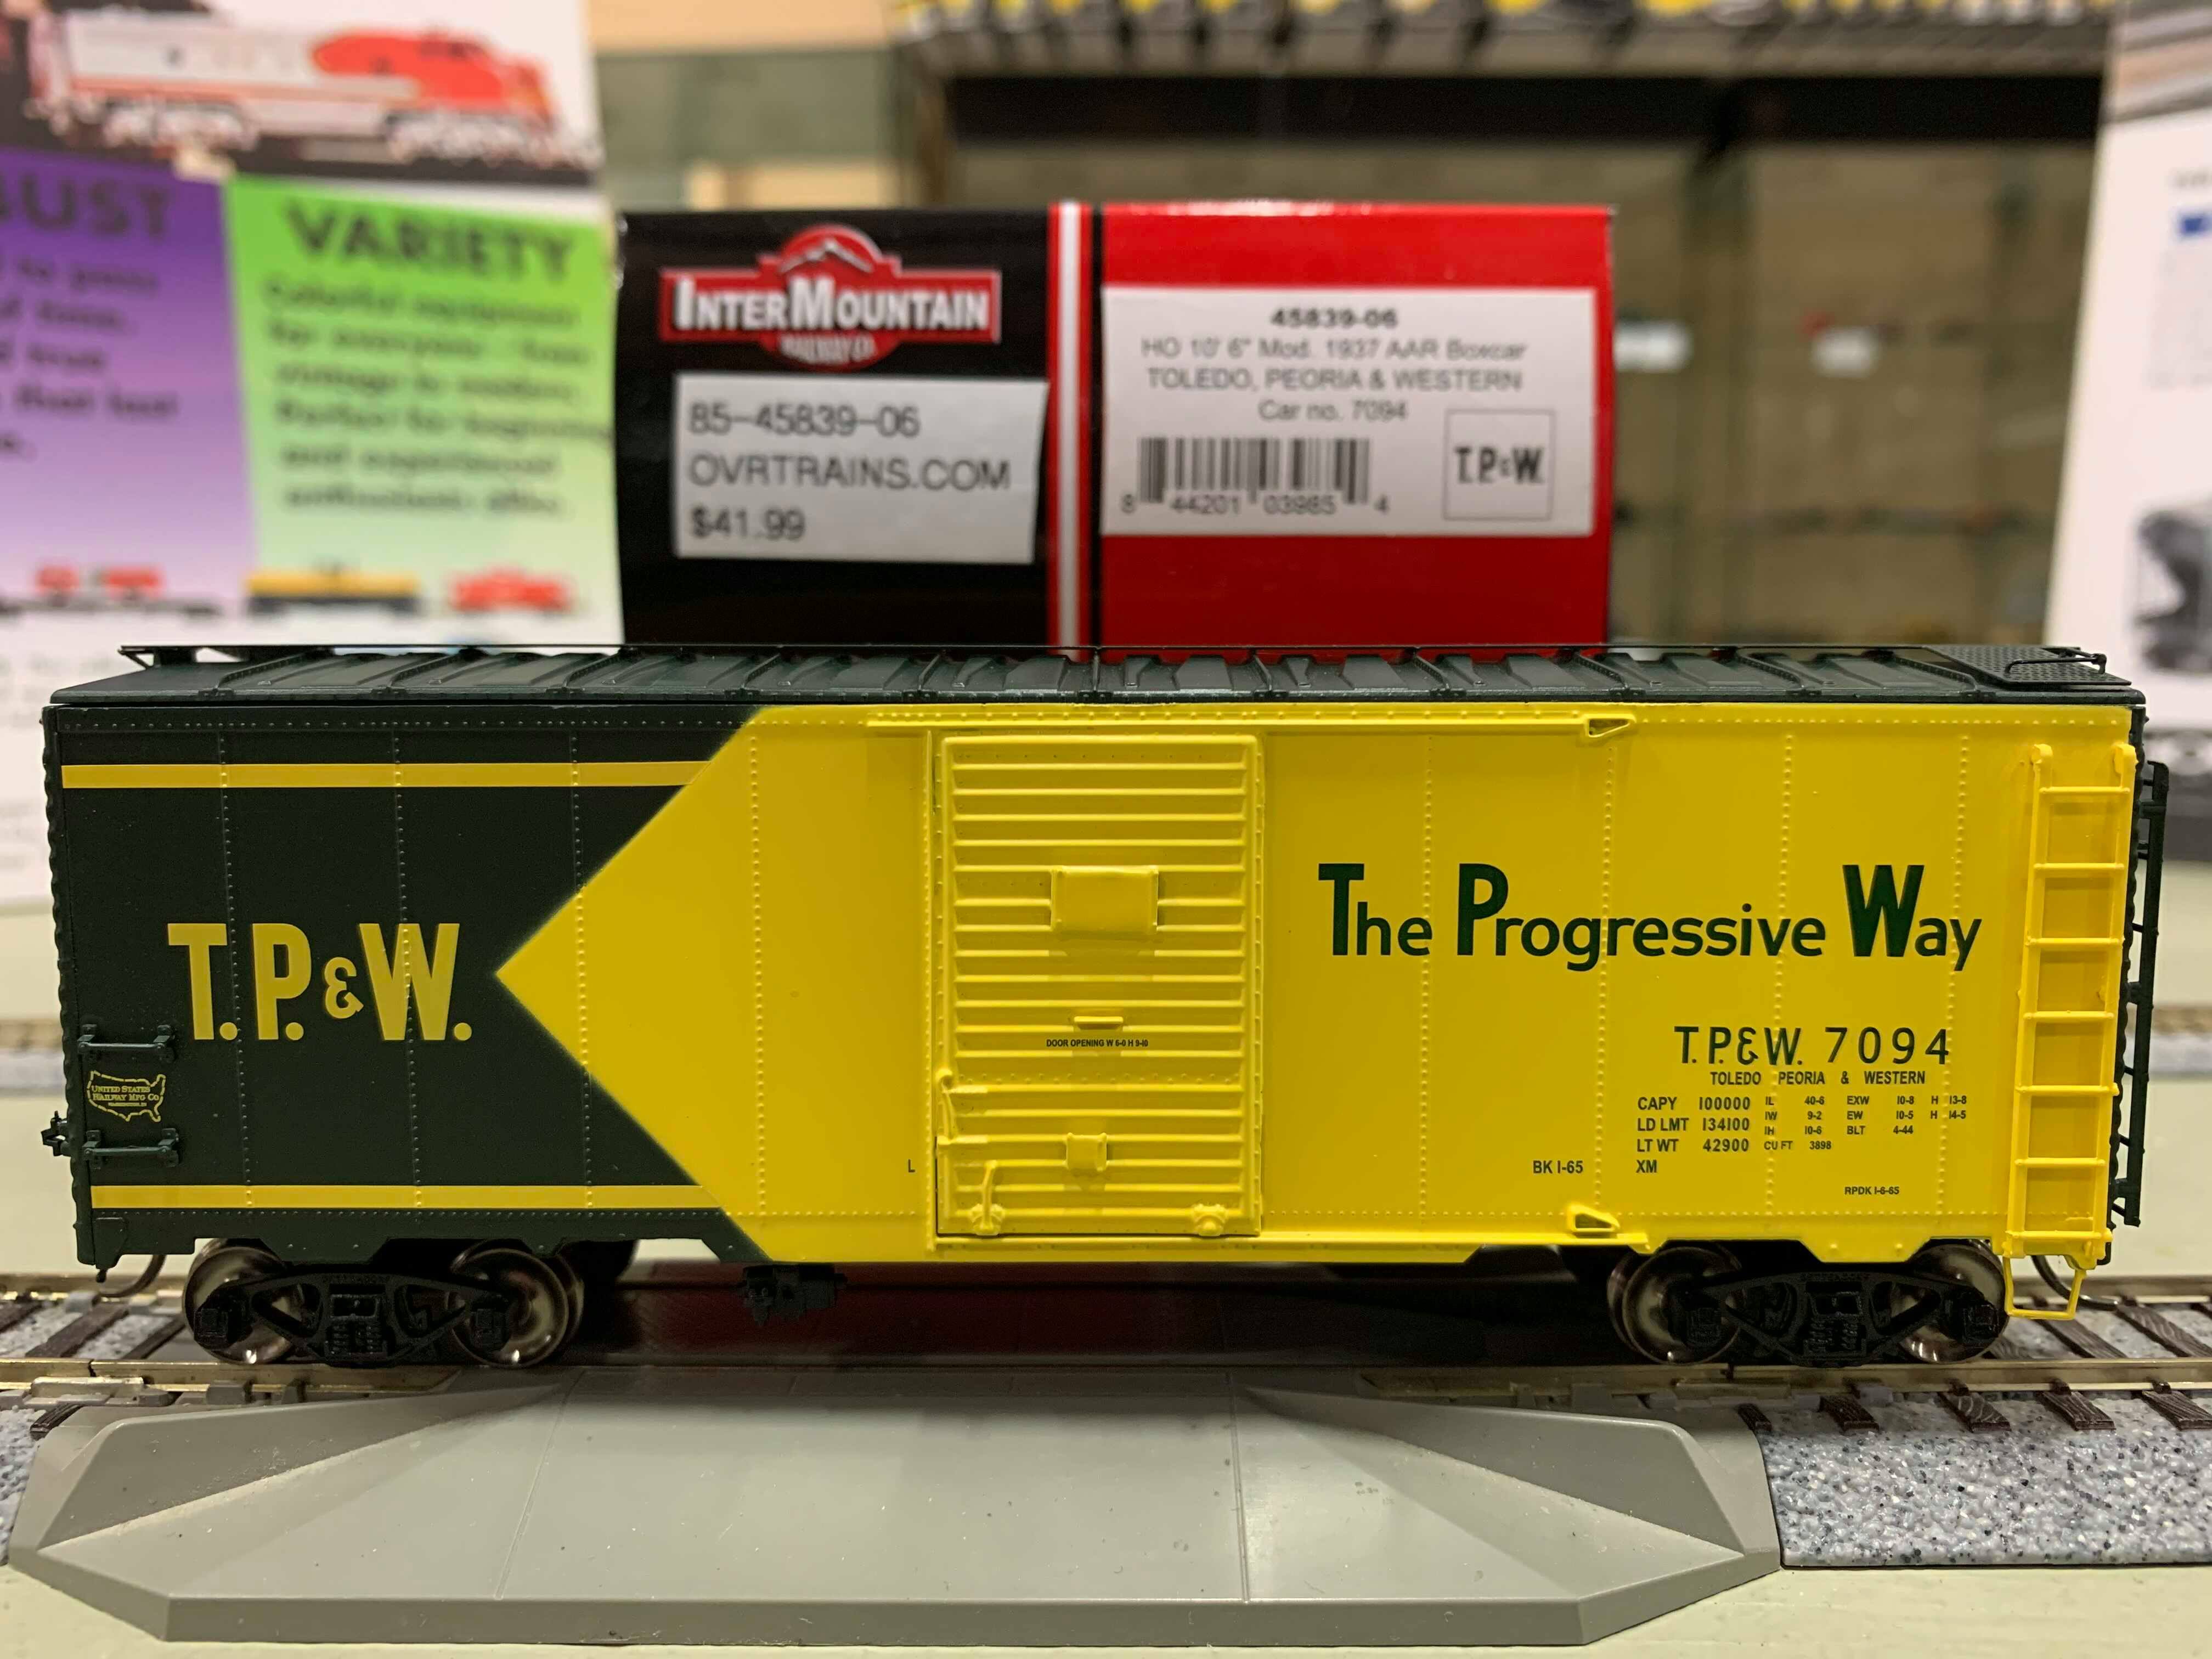 Intermountain 45839-04 HO Scale - 10Ft 6In Modified 1937 AAR Boxcar - Toledo, Peoria & Western #7056